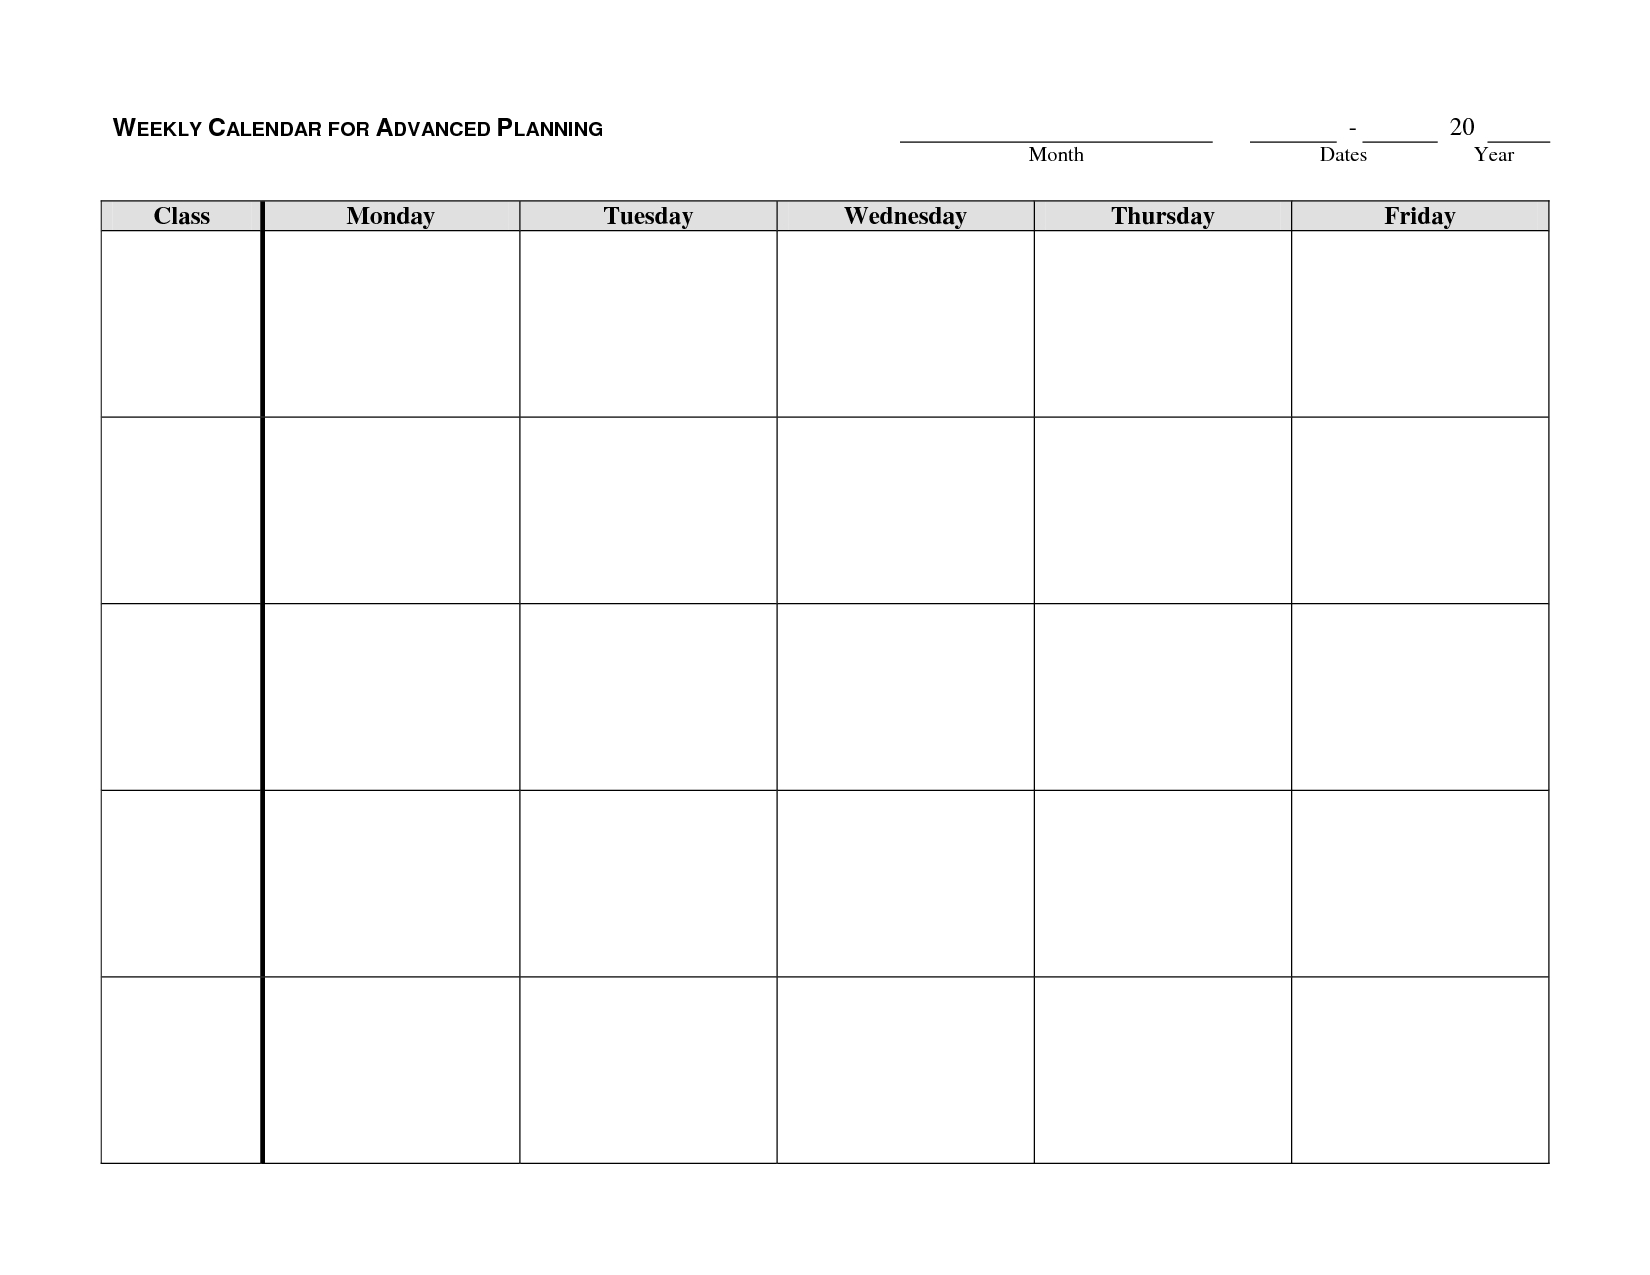 Weekly Calendar Template - Google Search | Autism/school-Blank Calendar Page Monday To Friday